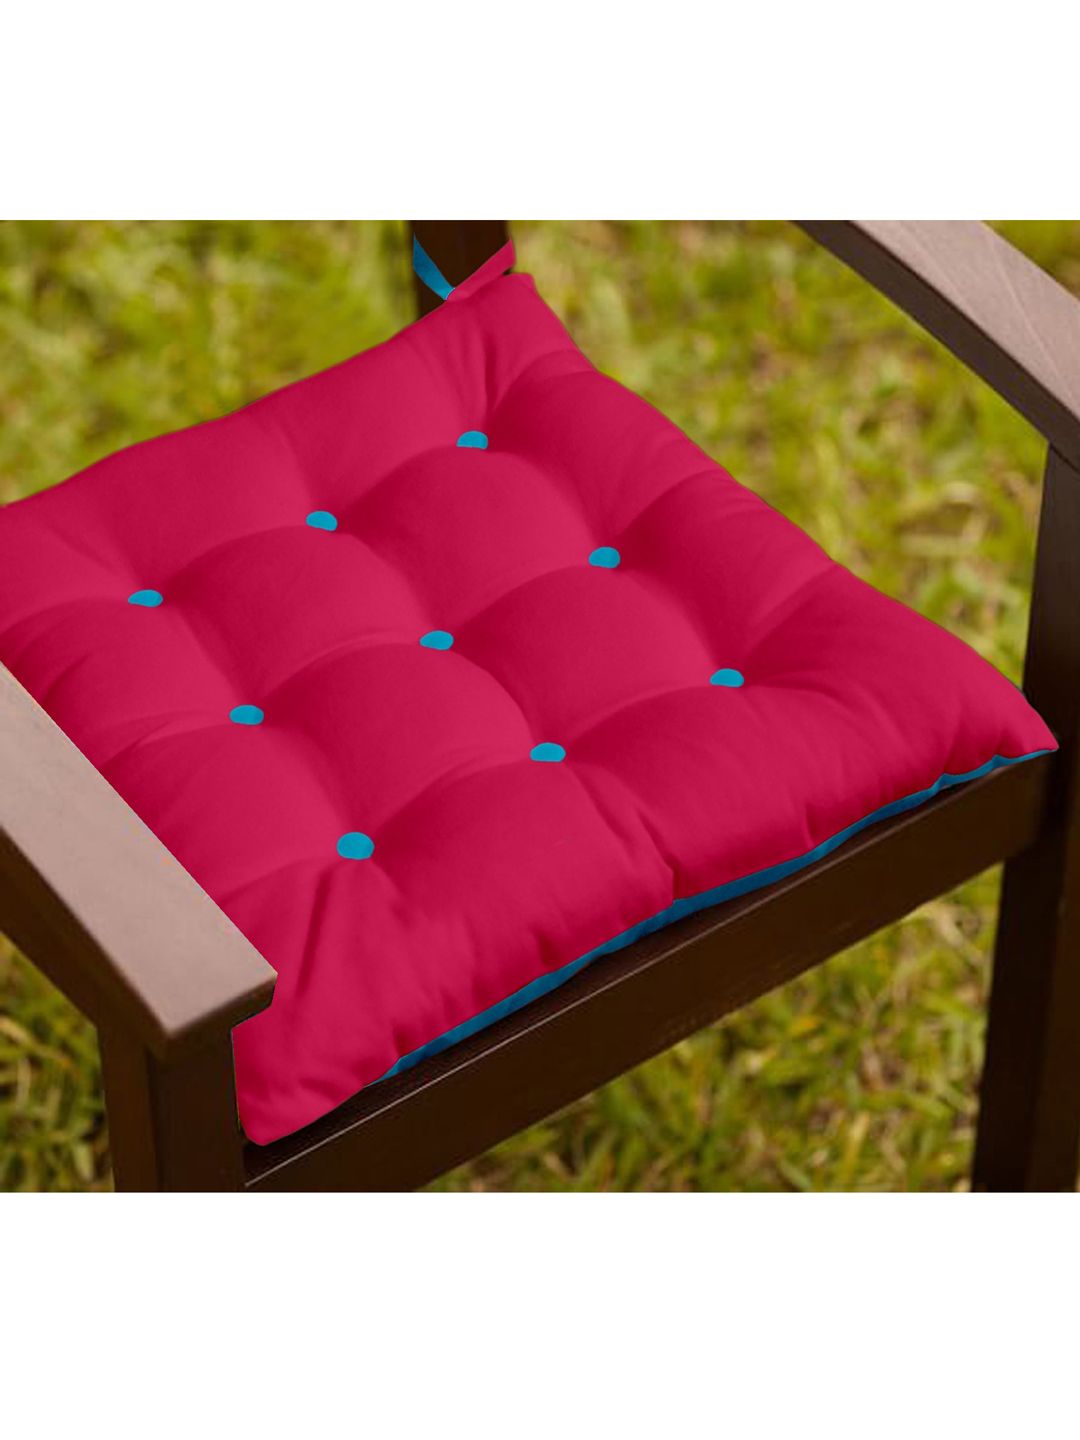 Lushomes Blue & Pink Solid Chair Pads Cushion with Strings Price in India